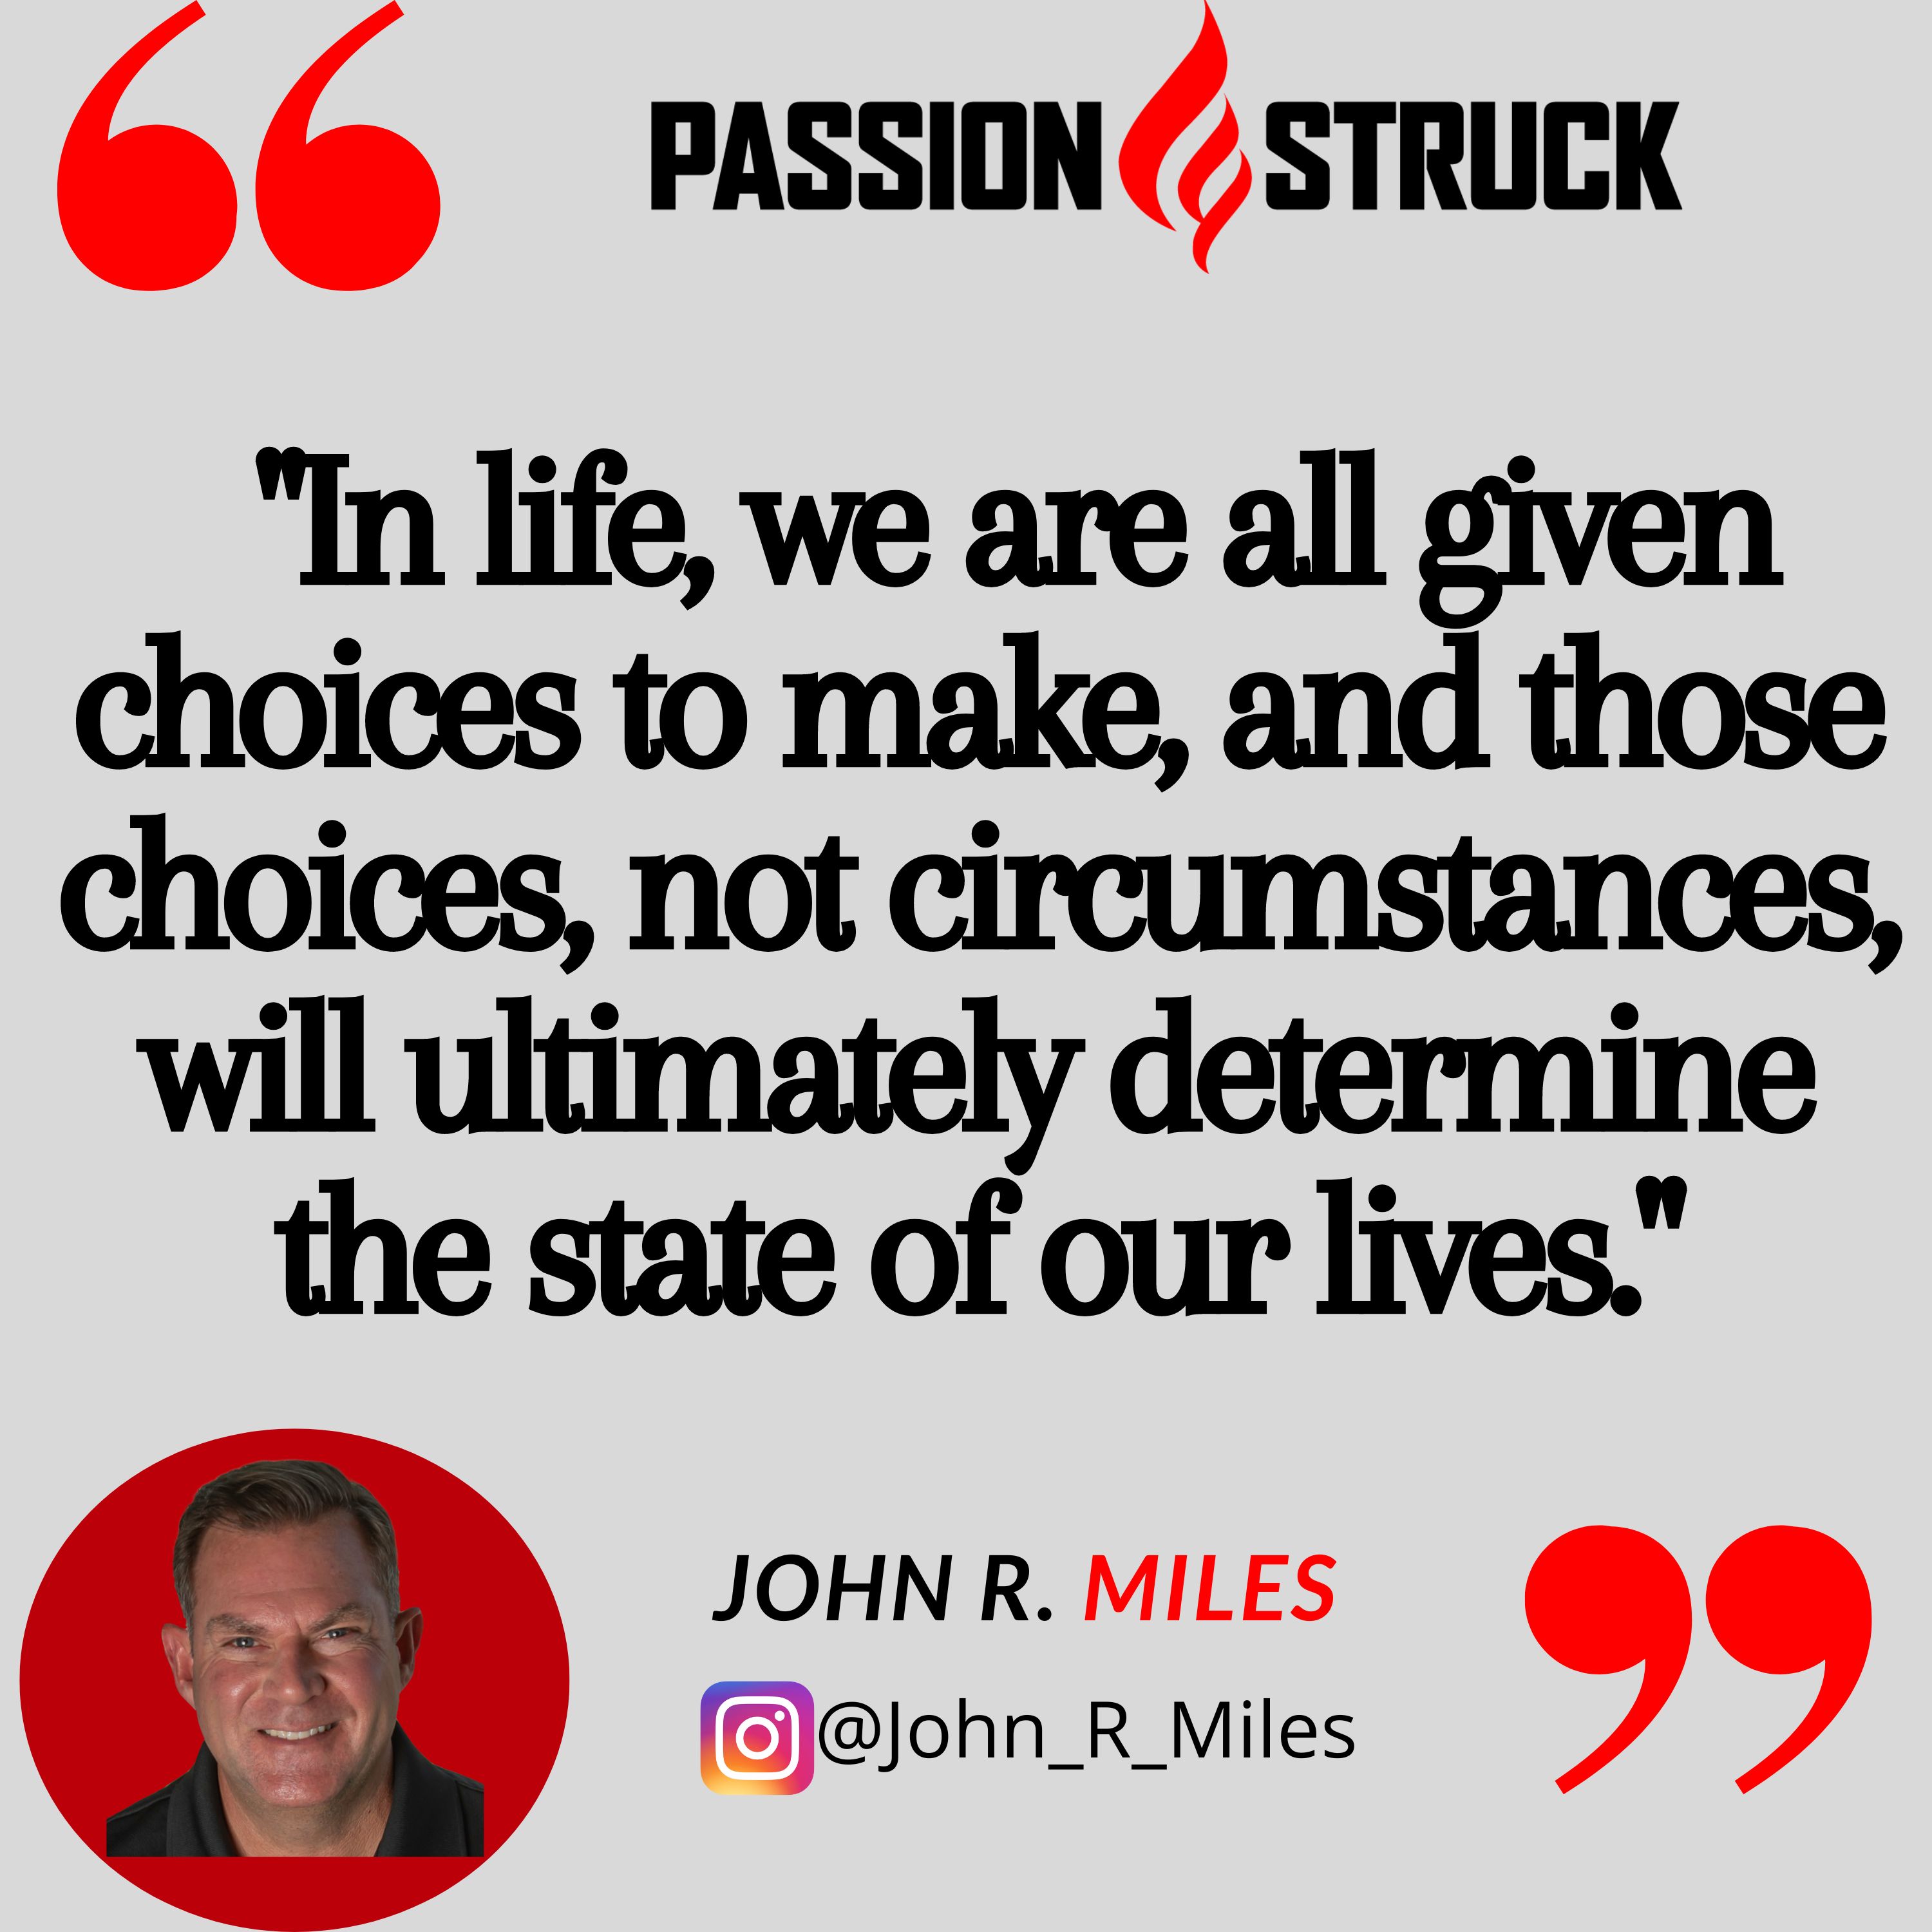 Quote by John R. Miles from the passion struck podcast: ""In life, we are all given choices to make, and those choices, not circumstances, will ultimately determine the state of our lives."